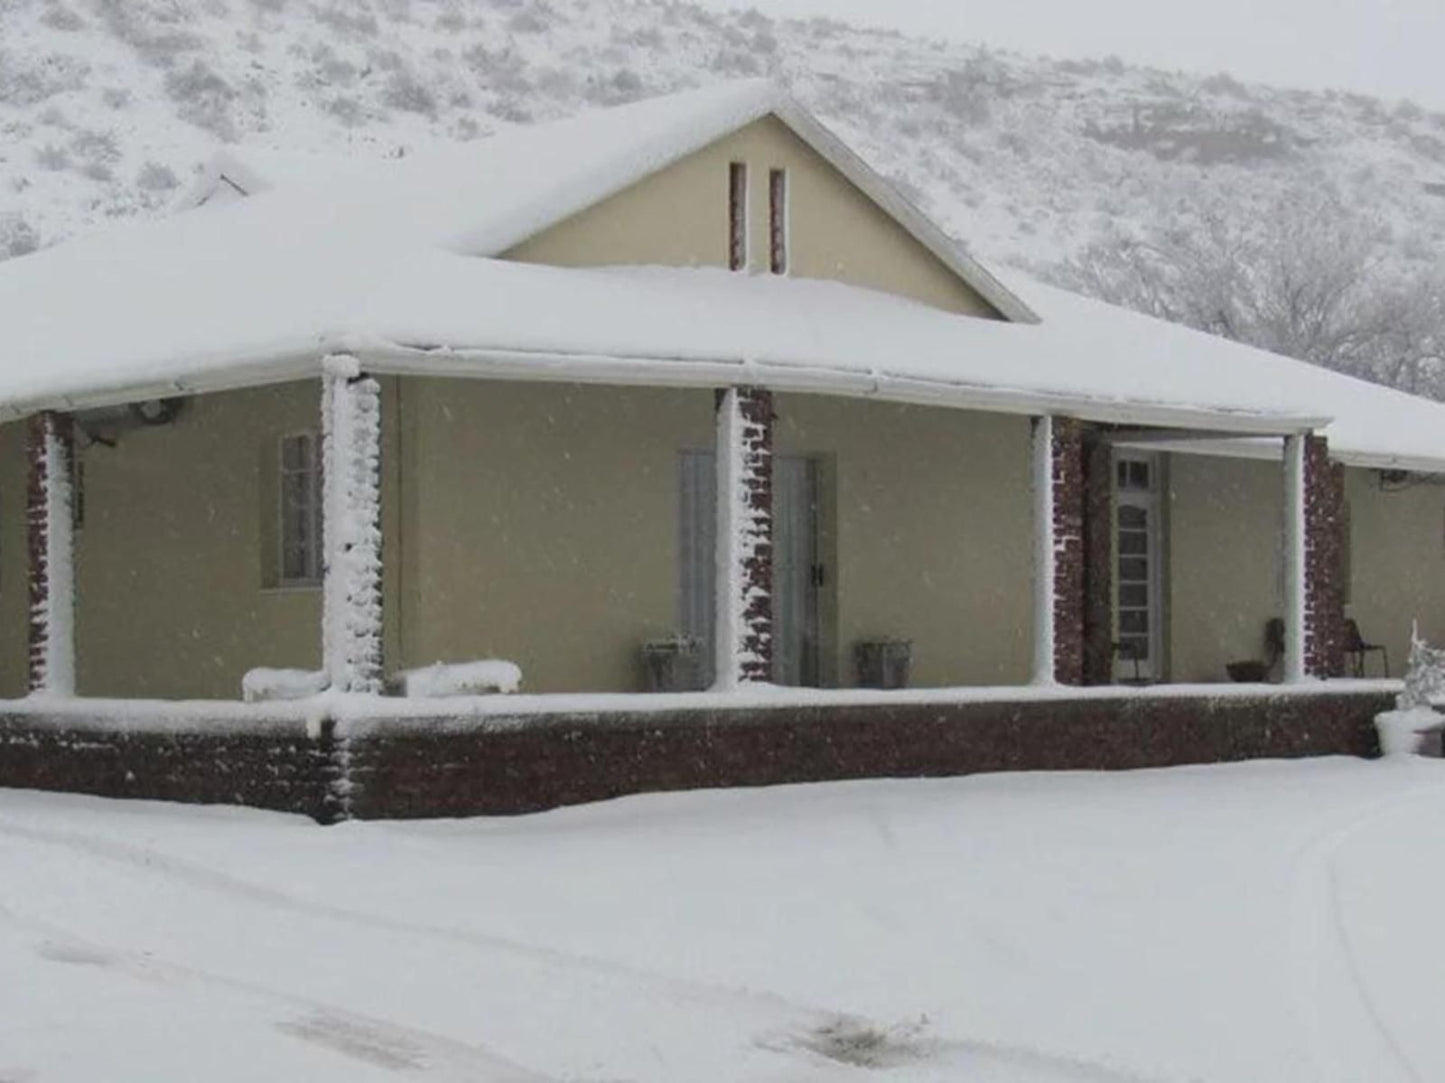 Welvanpas Guest House Middelburg Eastern Cape Eastern Cape South Africa Colorless, Snow, Nature, Winter